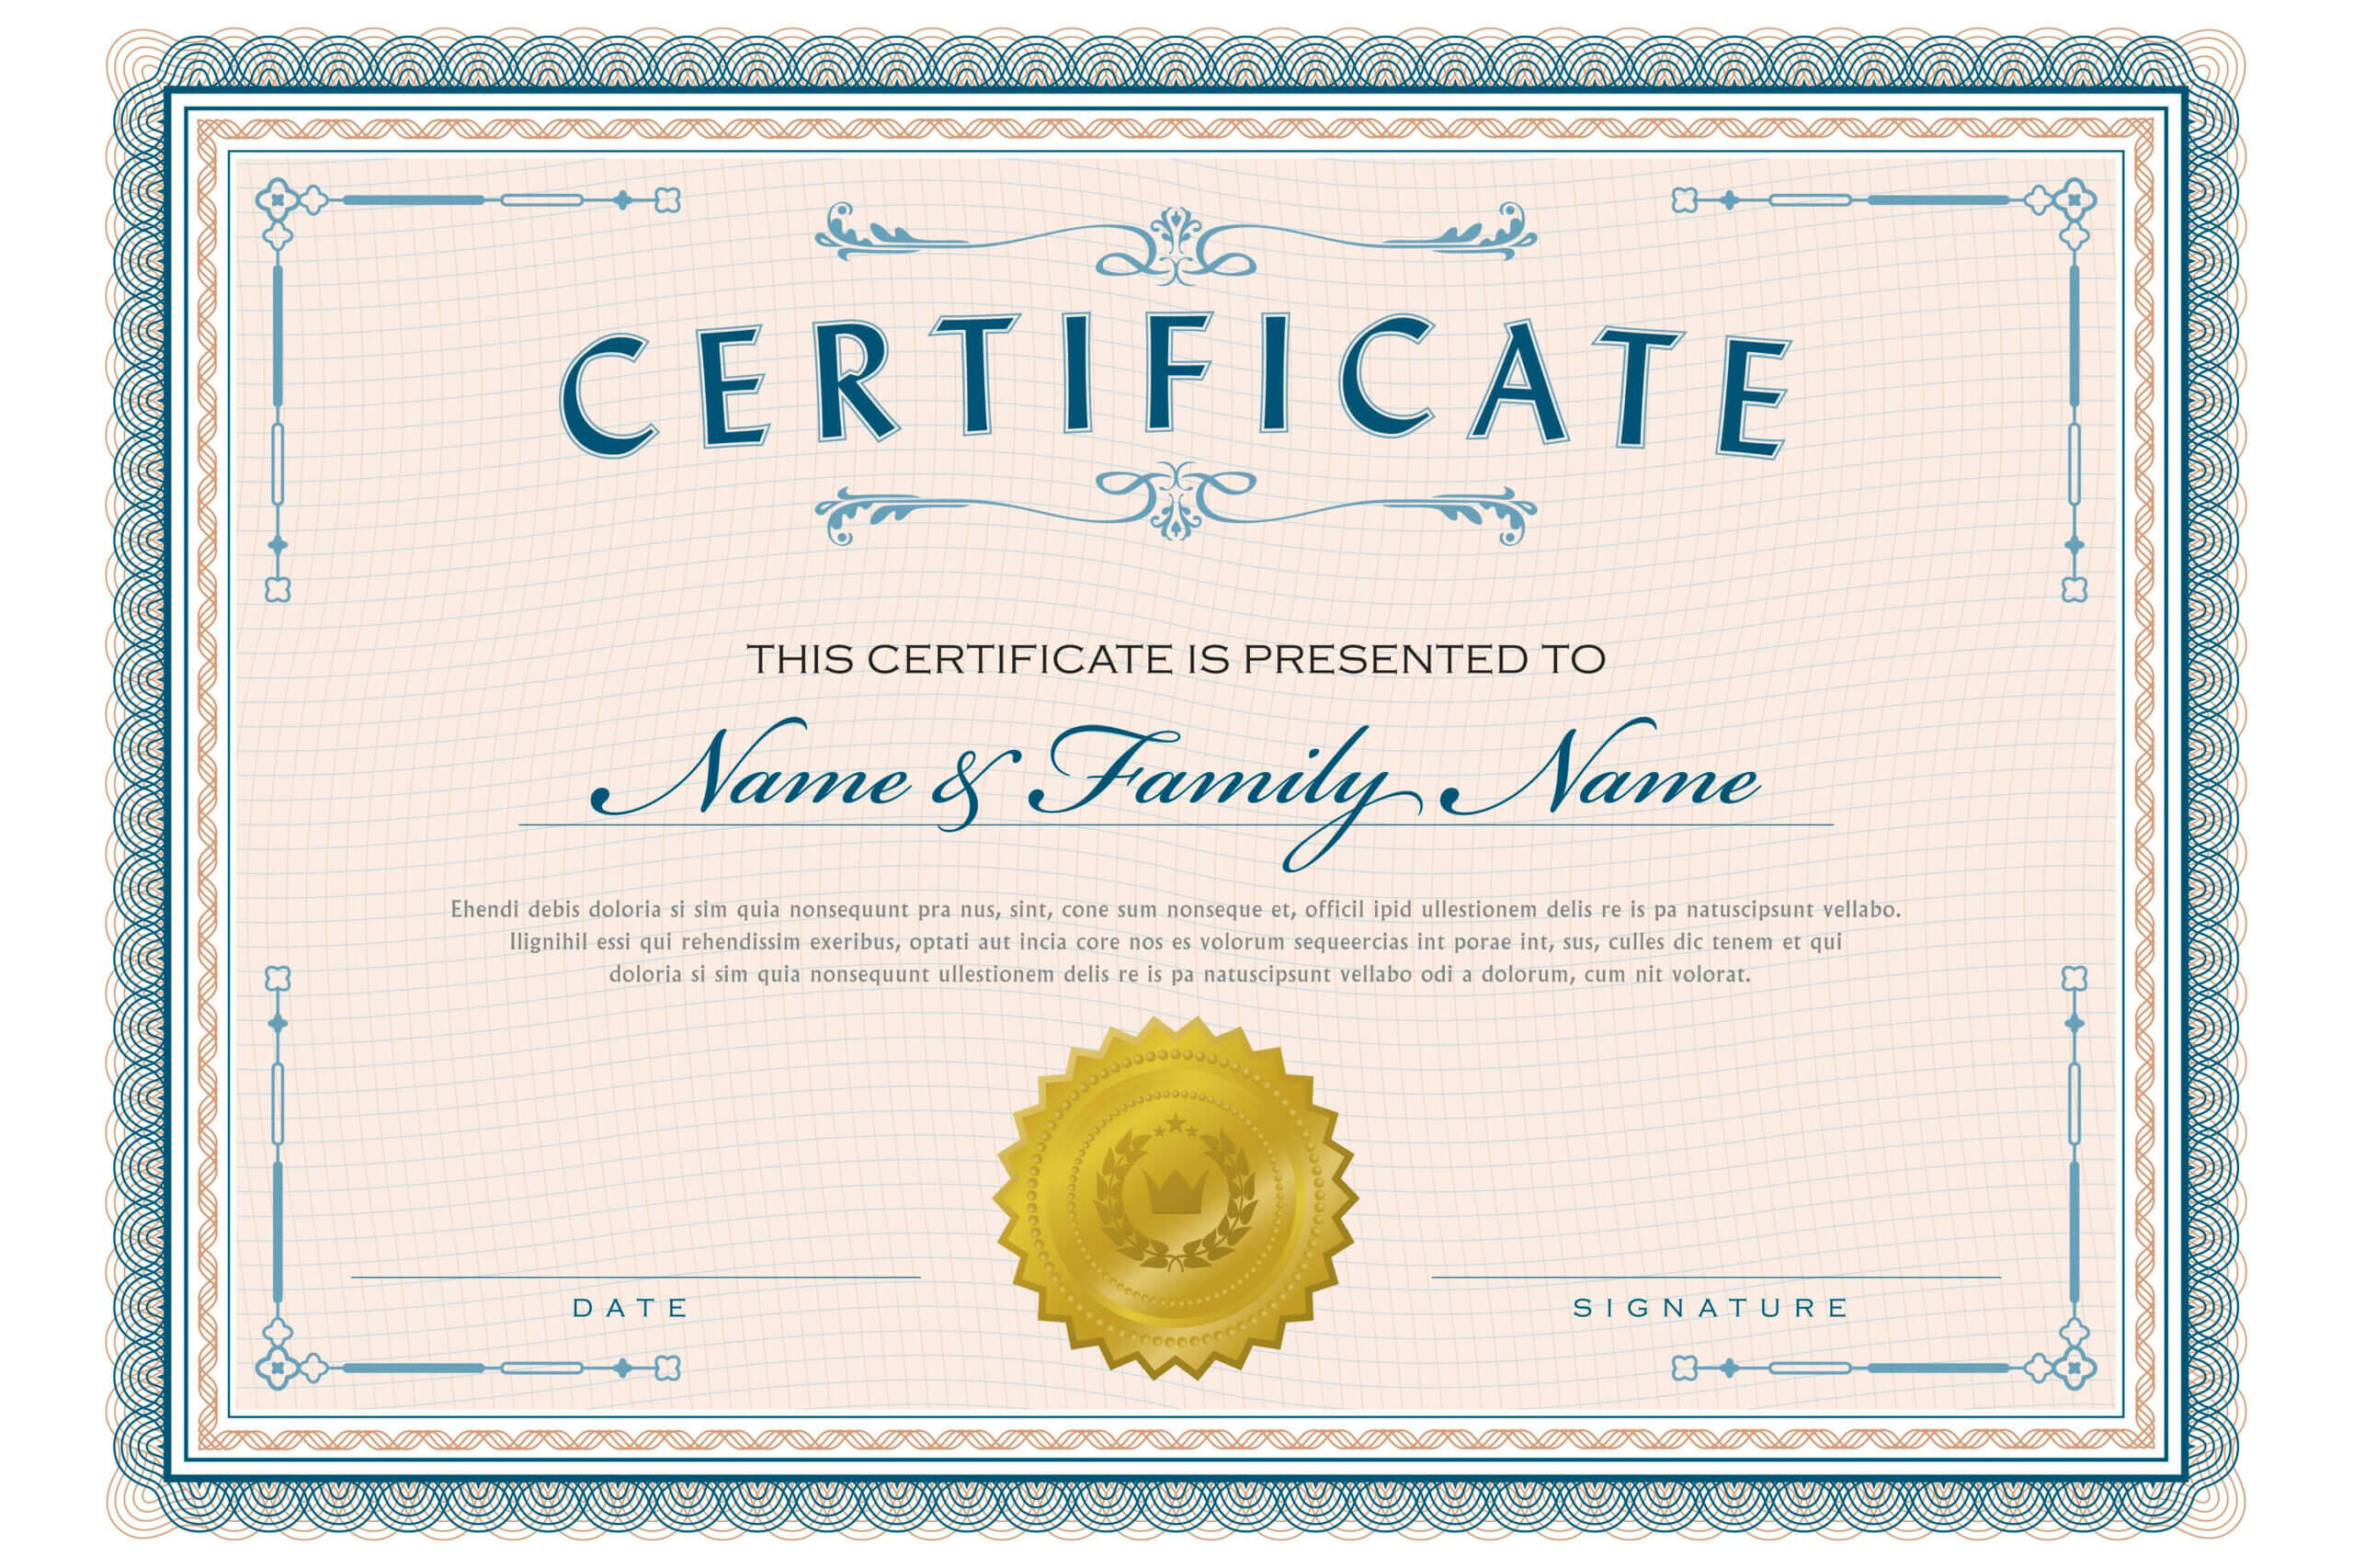 Necessary Parts Of An Award Certificate For Golf Certificate Templates For Word